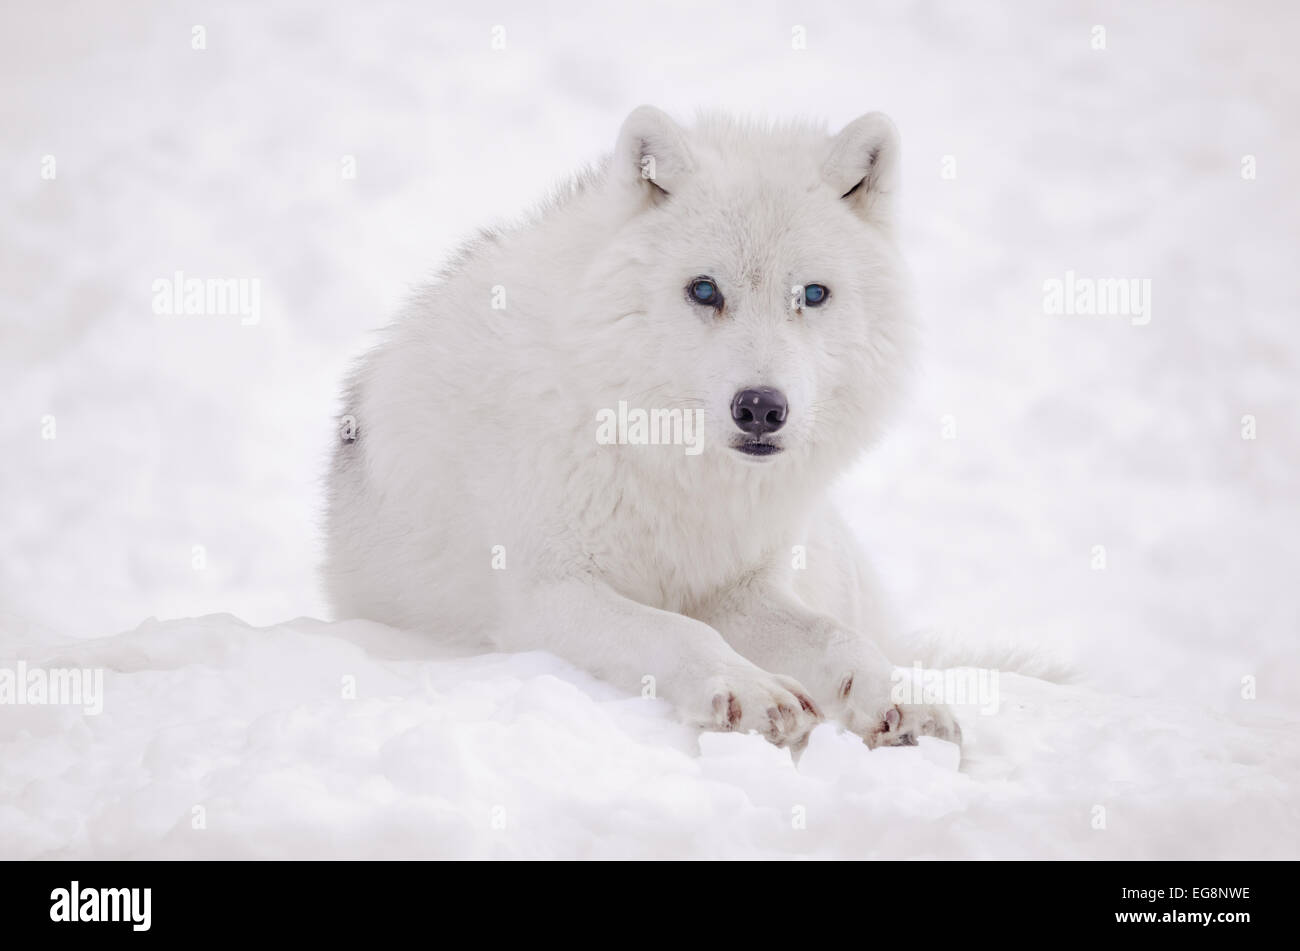 Arctic white wolf sitting in the snow with blue eyes looking at the camera Stock Photo